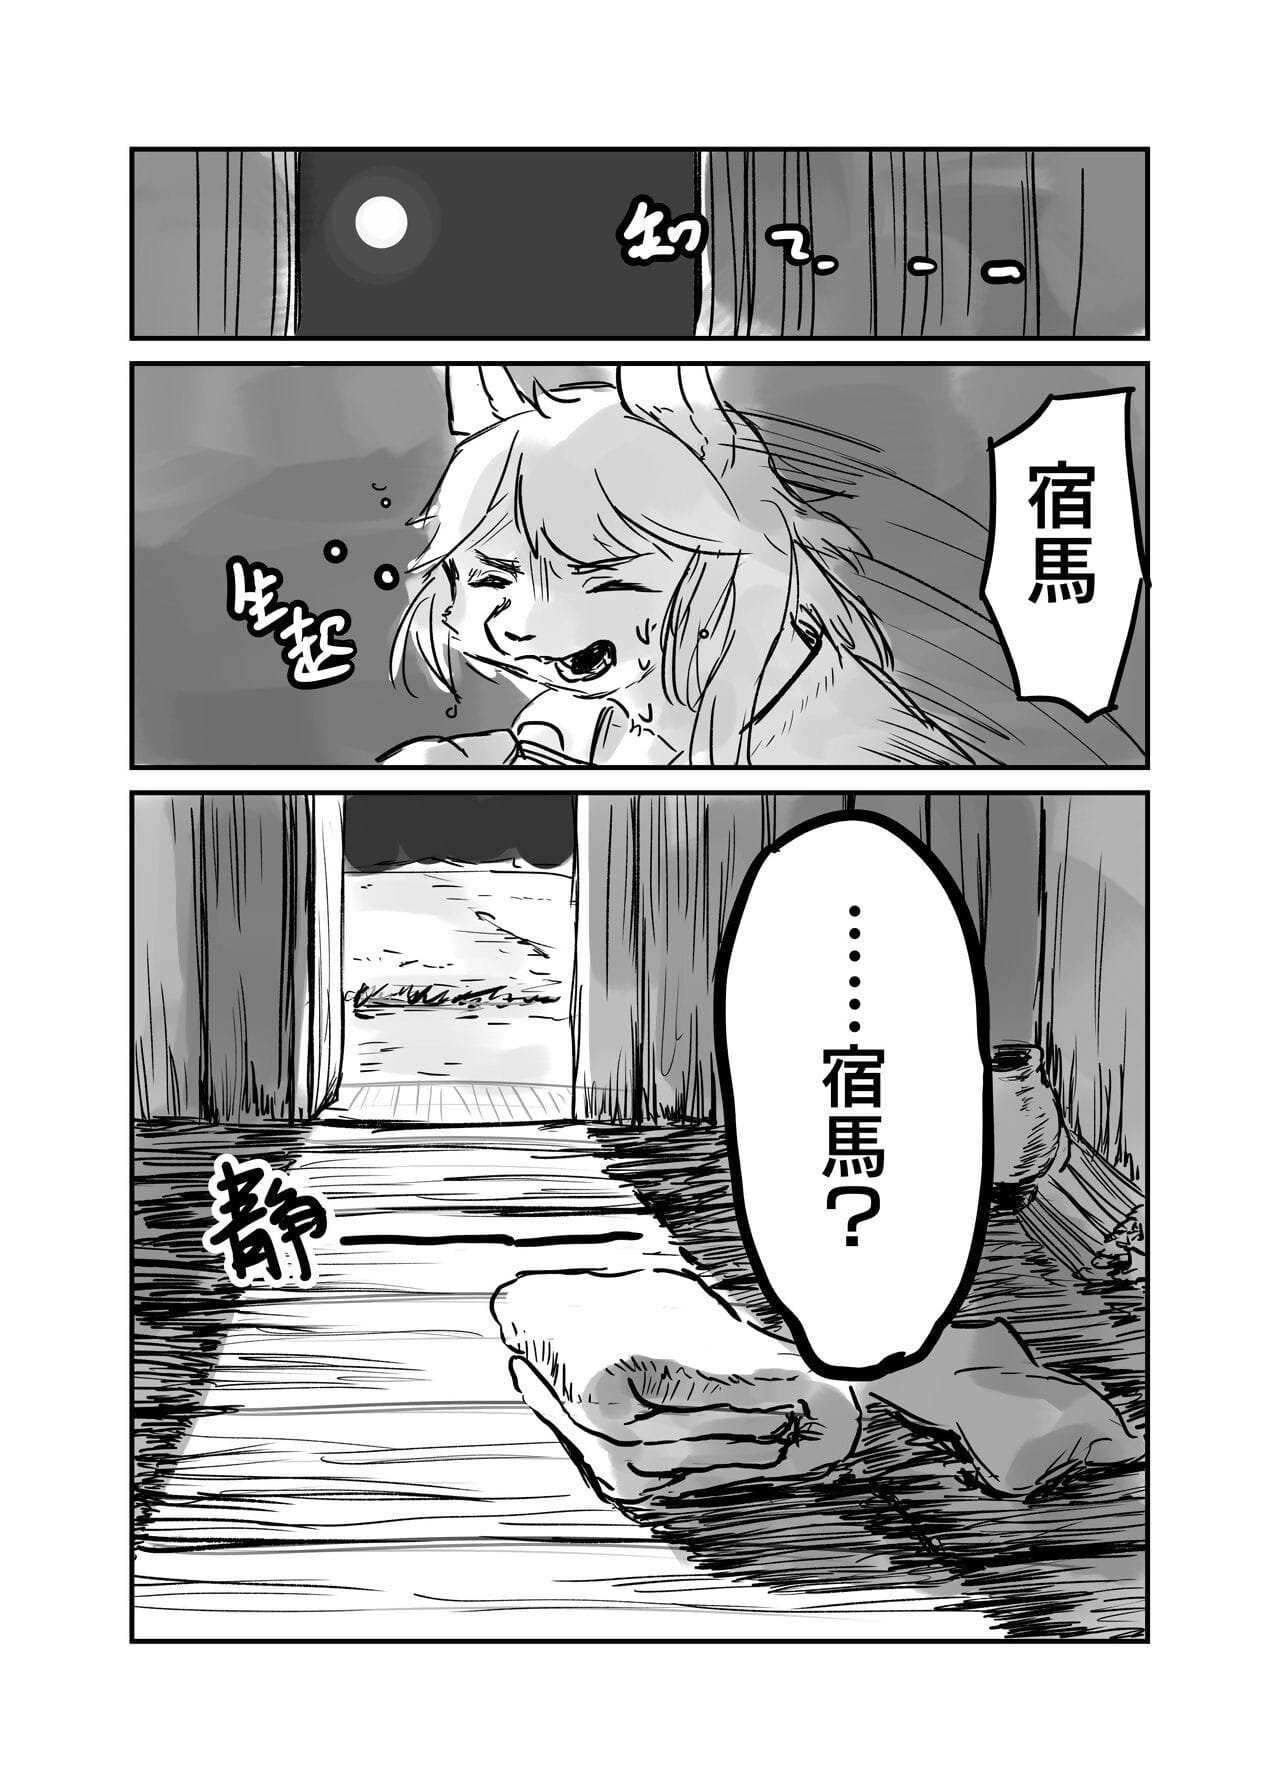 （the visitante 他乡之人 by：鬼流 parte 2 page 1